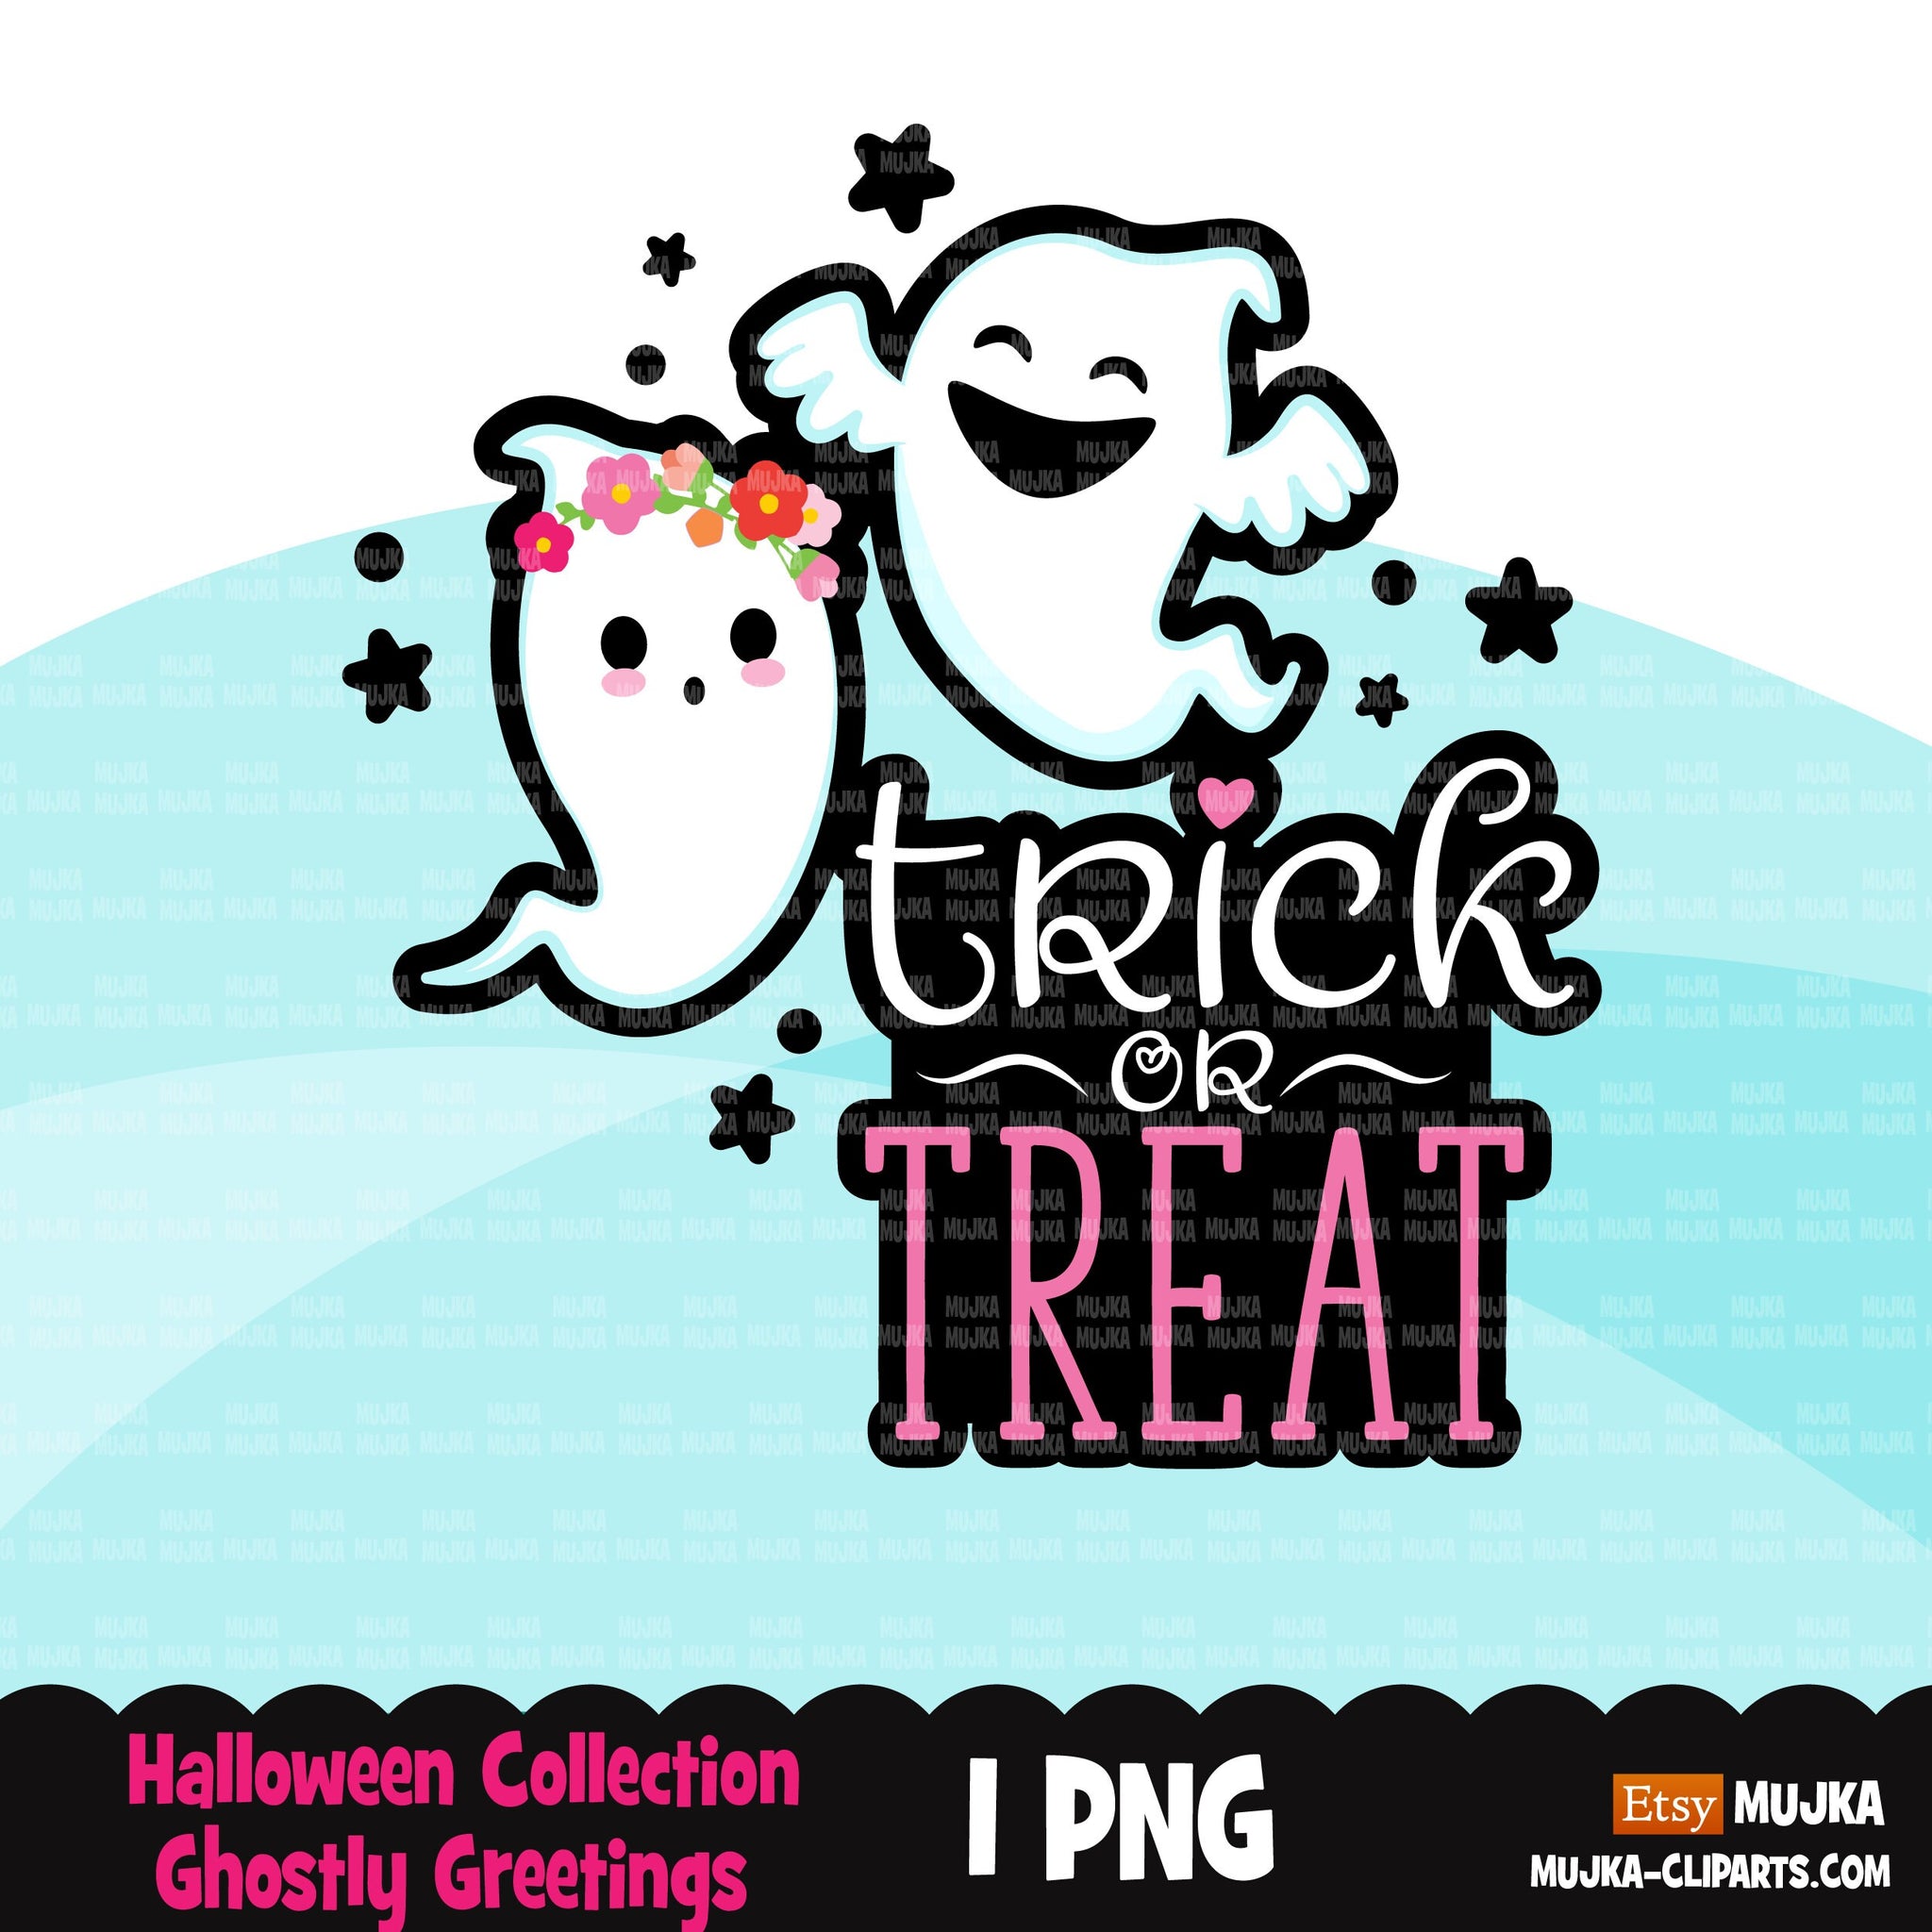 Trick or treat clipart, Halloween clipart, trick or treat png, ghost clipart, Halloween sublimation designs digital download, cute ghosts